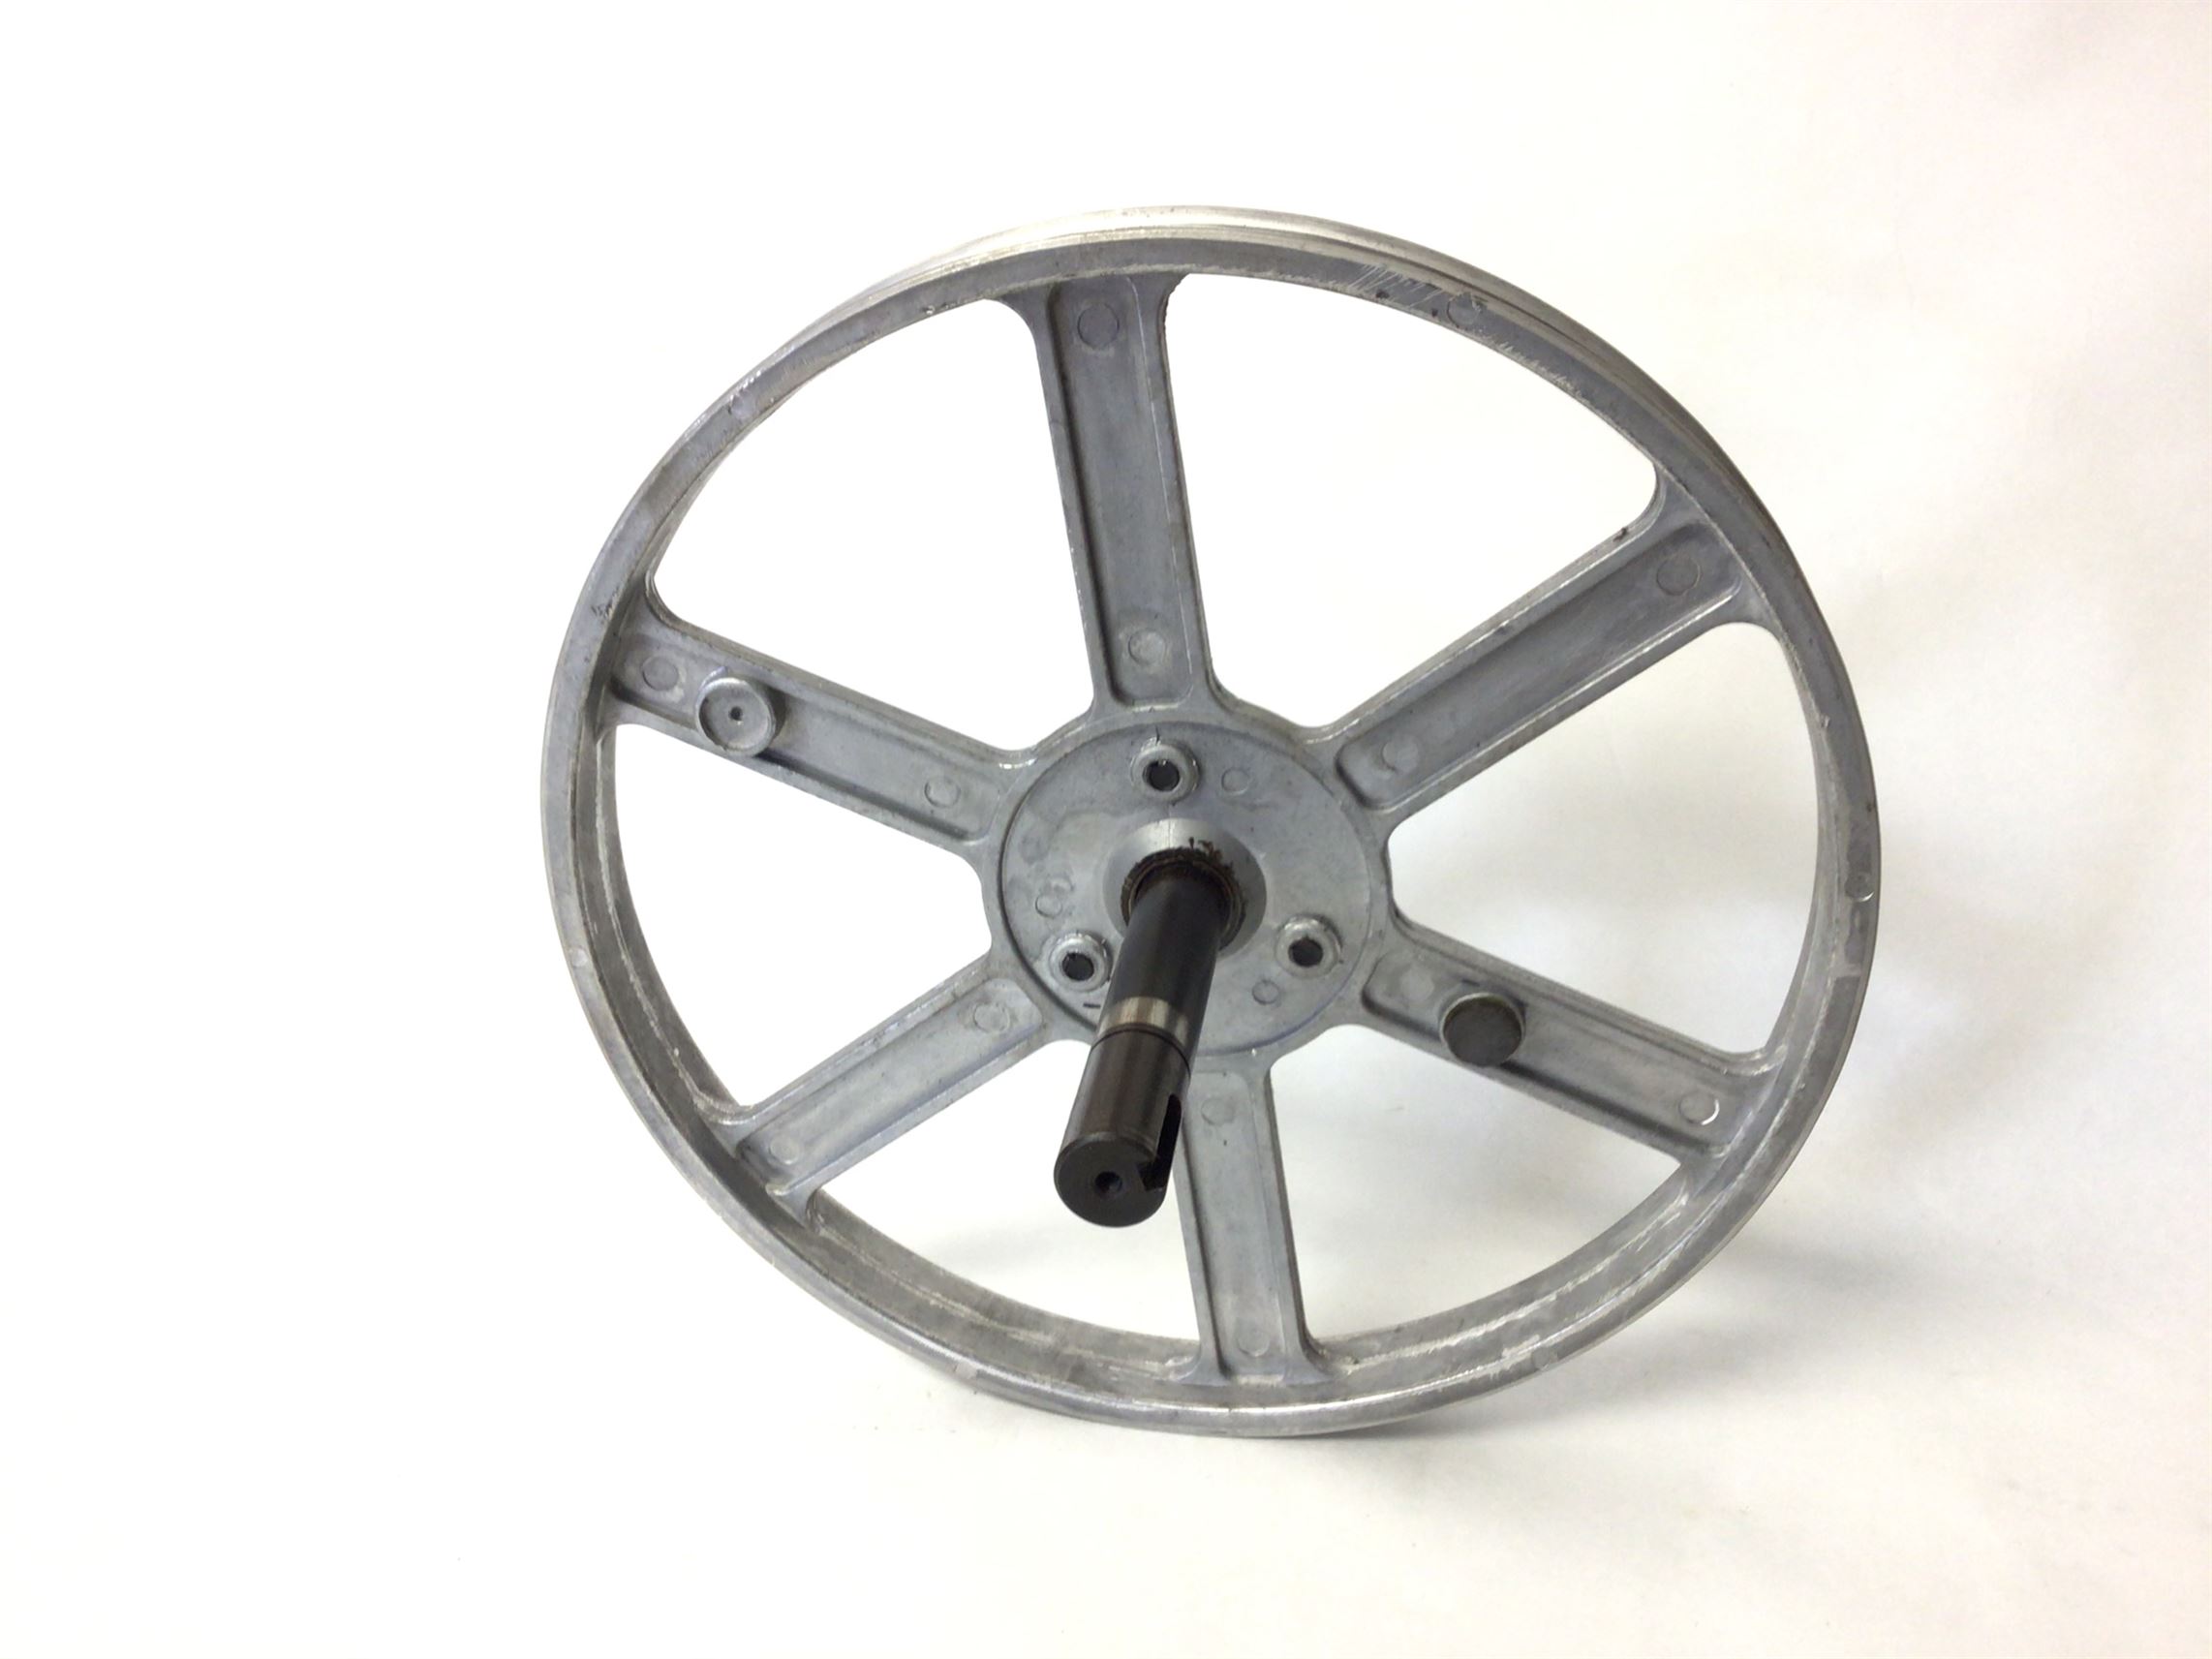 Elliptical Pulley With Crank (Used)